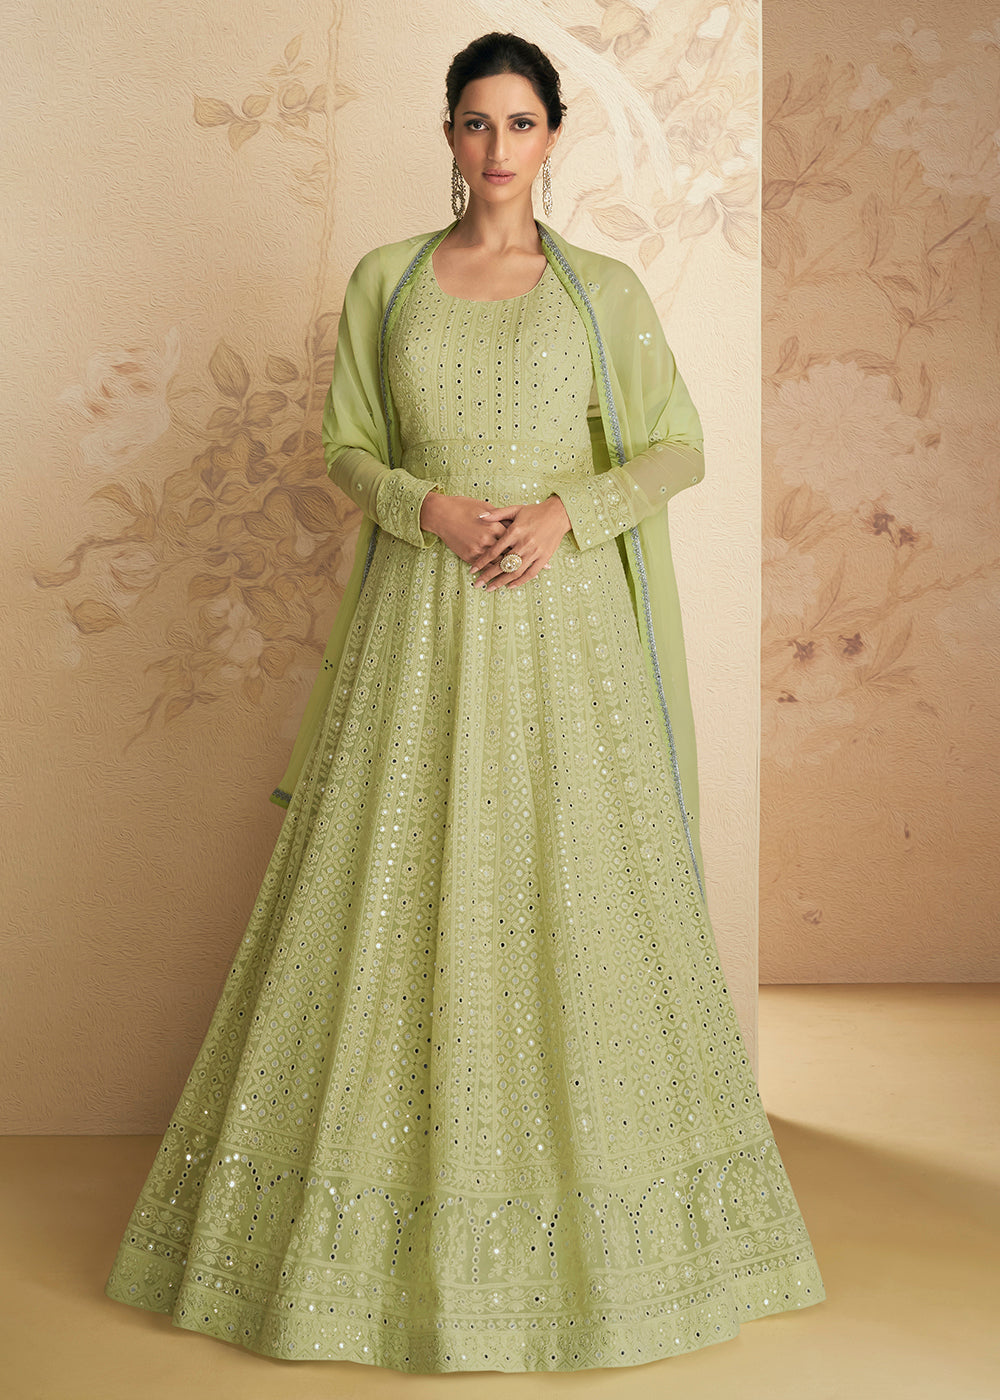 Buy Now Chikankari Style Green Traditional Work Festive Anarkali Gown Online in USA, UK, Australia, New Zealand, Canada & Worldwide at Empress Clothing.